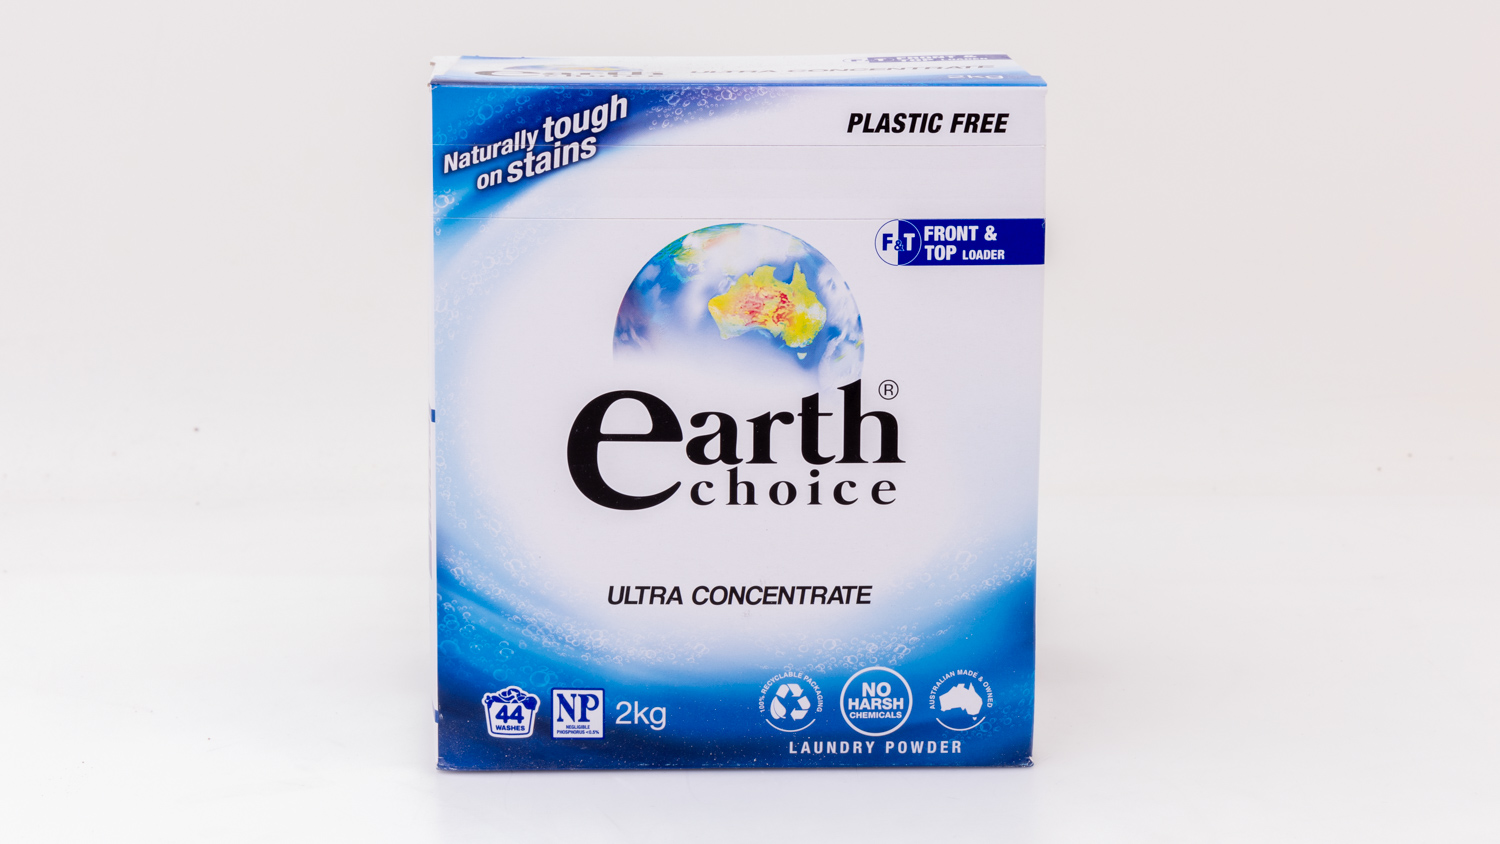 Earth Choice Ultra Concentrate Laundry Powder Front Loader carousel image